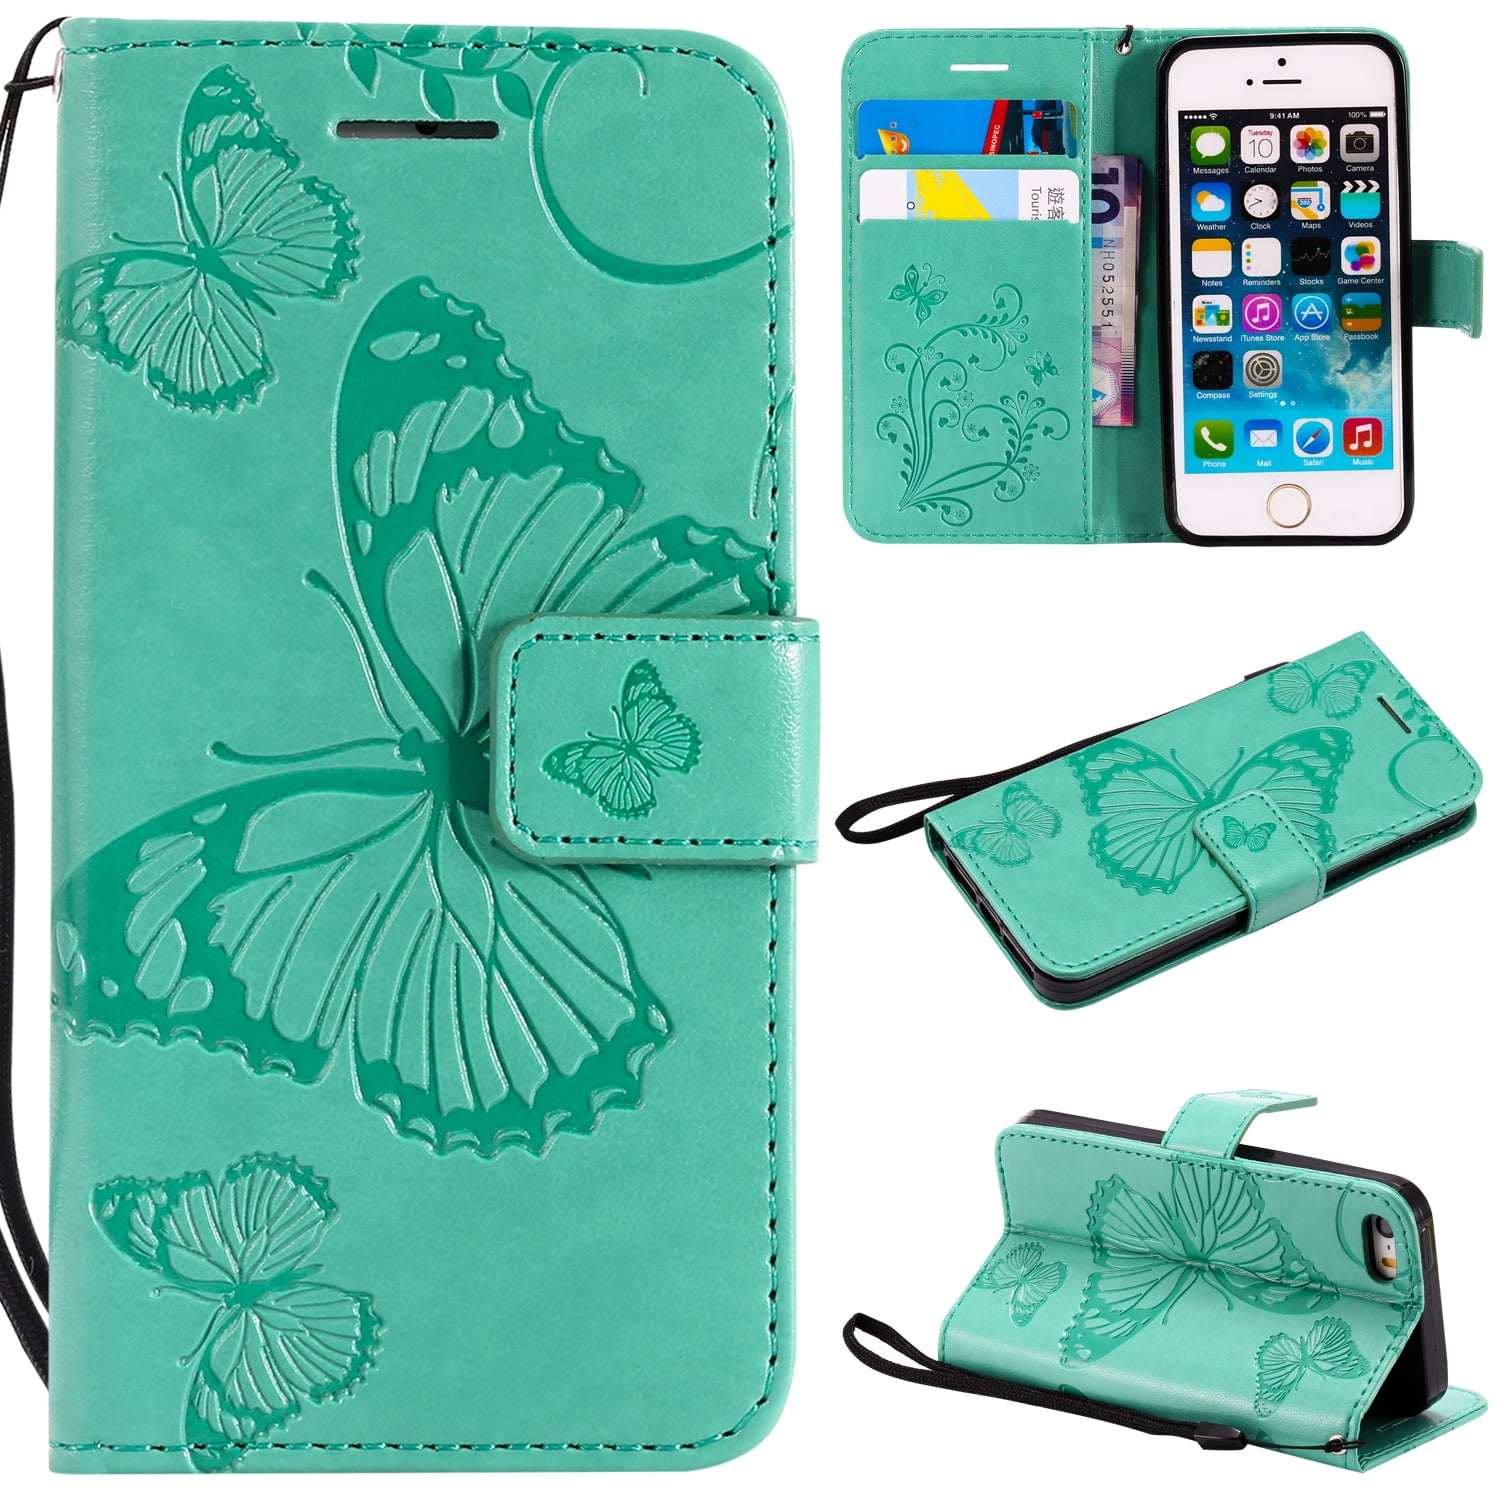 iPhone 5S Case,iPhone 5 Case,iPhone SE(2016） Wallet case, Allytech Pretty Retro Embossed Butterfly Flower Design Pu Leather Style Wallet Flip Case Cover for Apple iPhone 5/ /SE(2016）, Green - Walmart.com